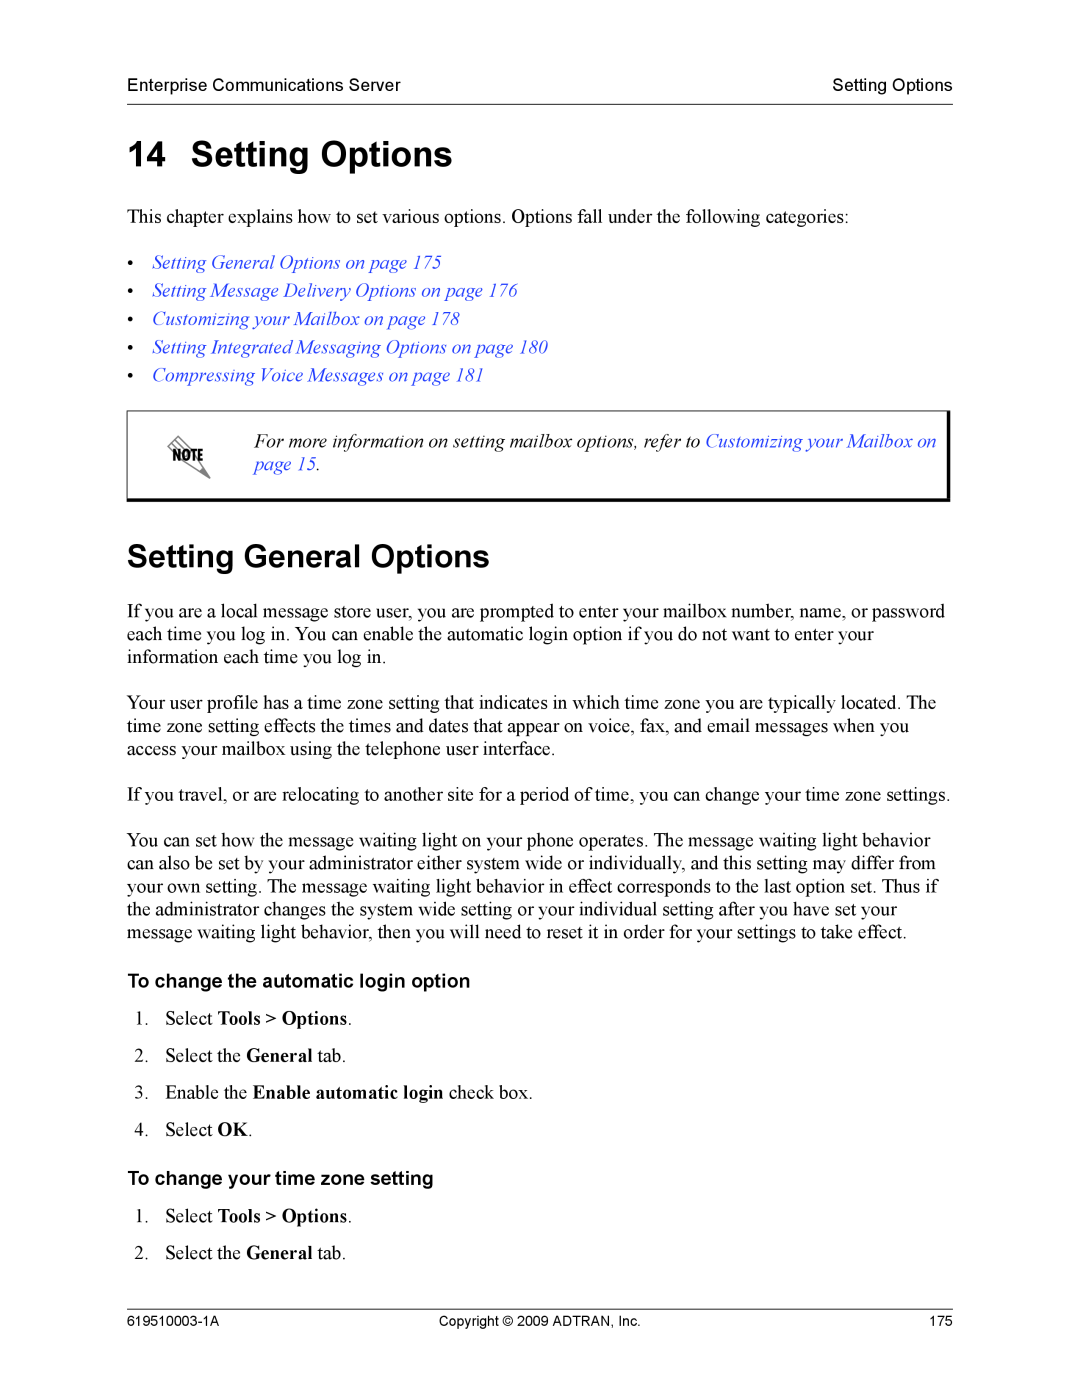 ADTRAN 619510003-1A manual Setting Options, Setting General Options on page, Setting Message Delivery Options on page 